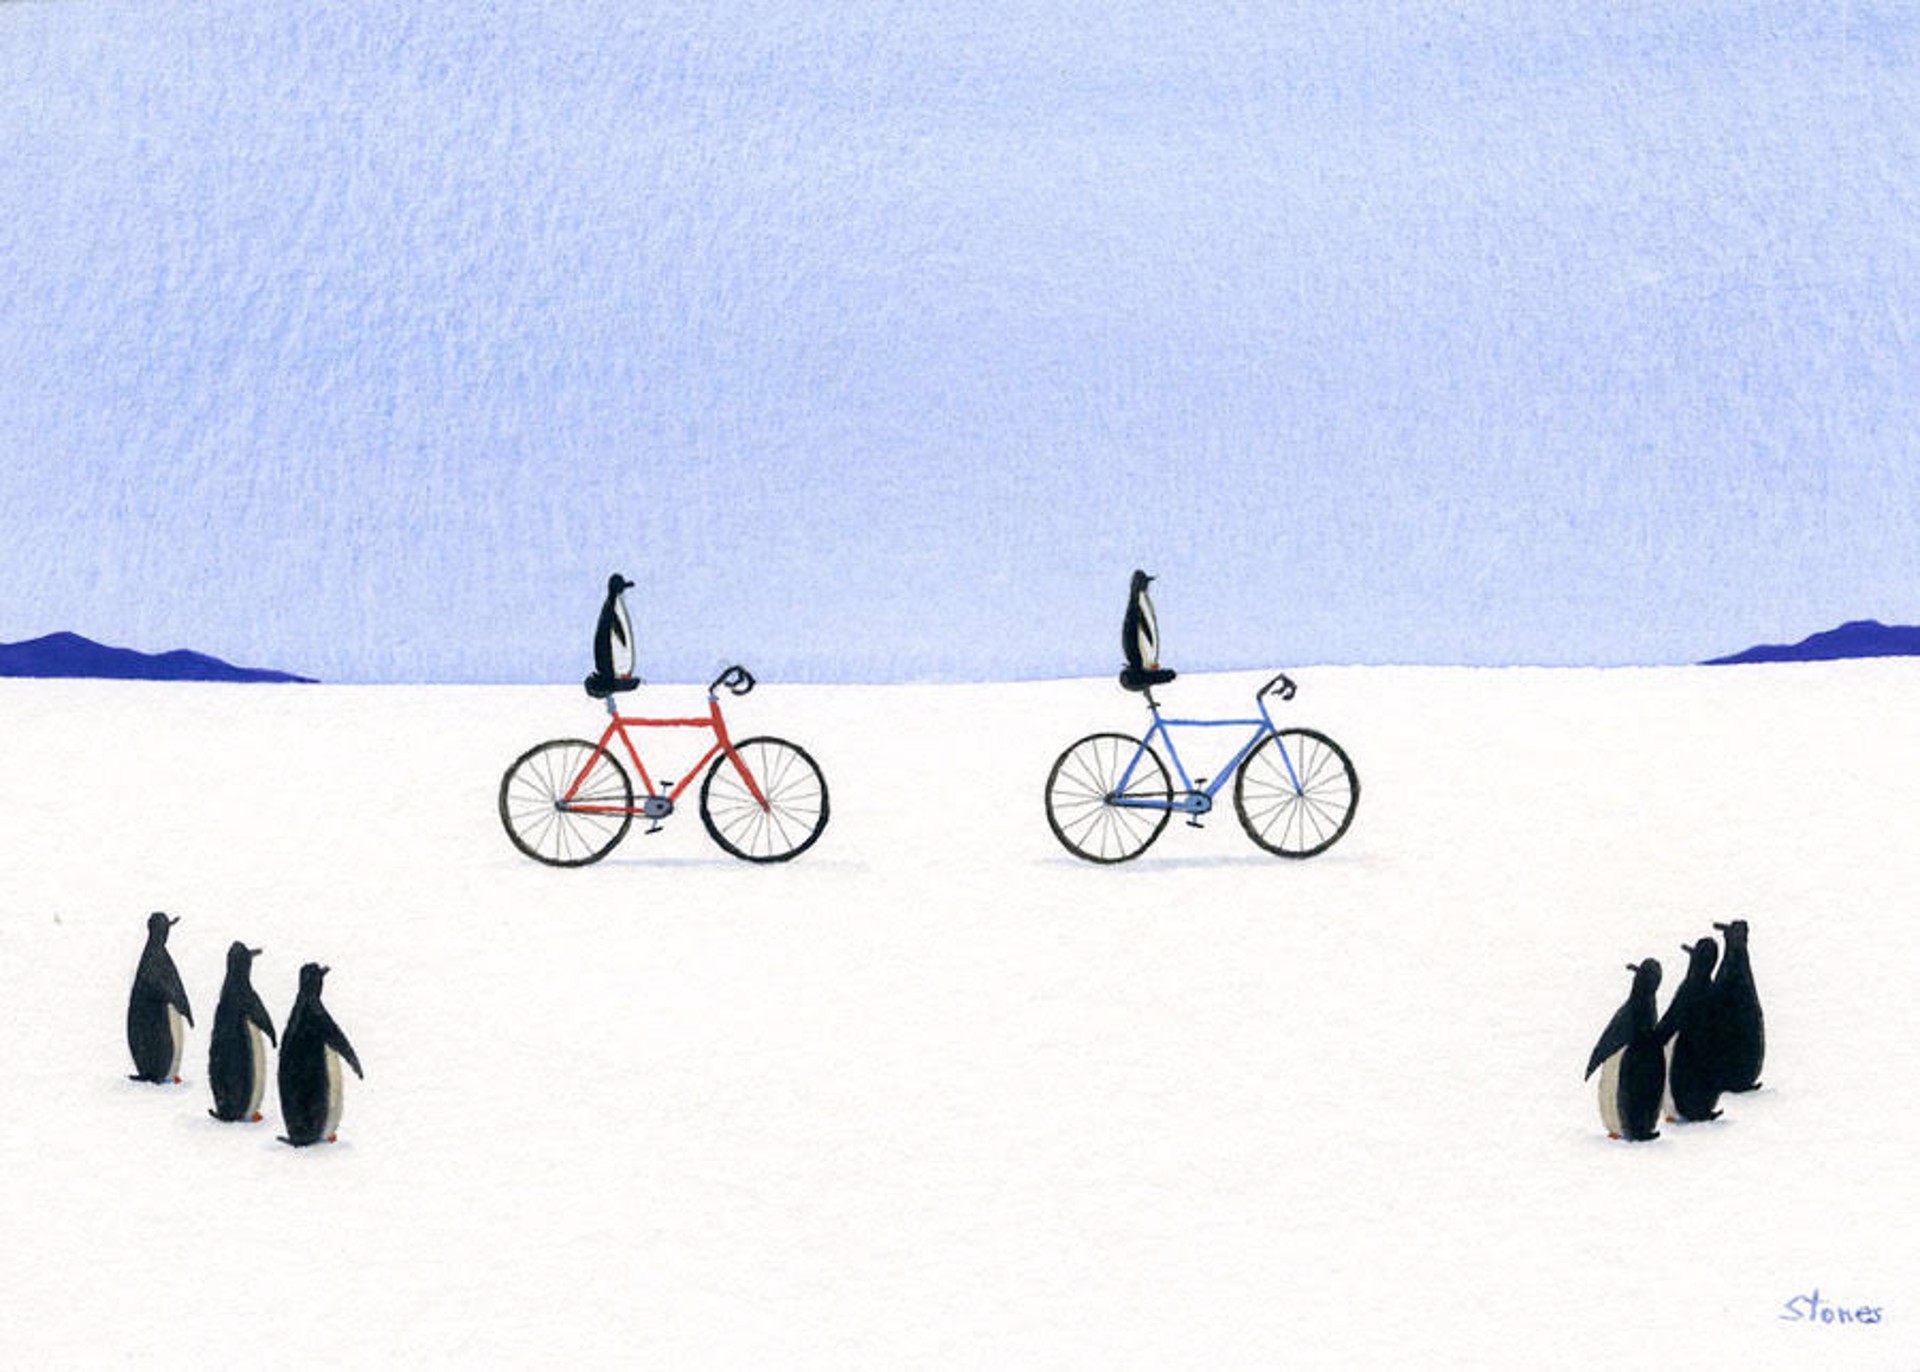 Eight Penguins, Two Bikes by Greg Stones